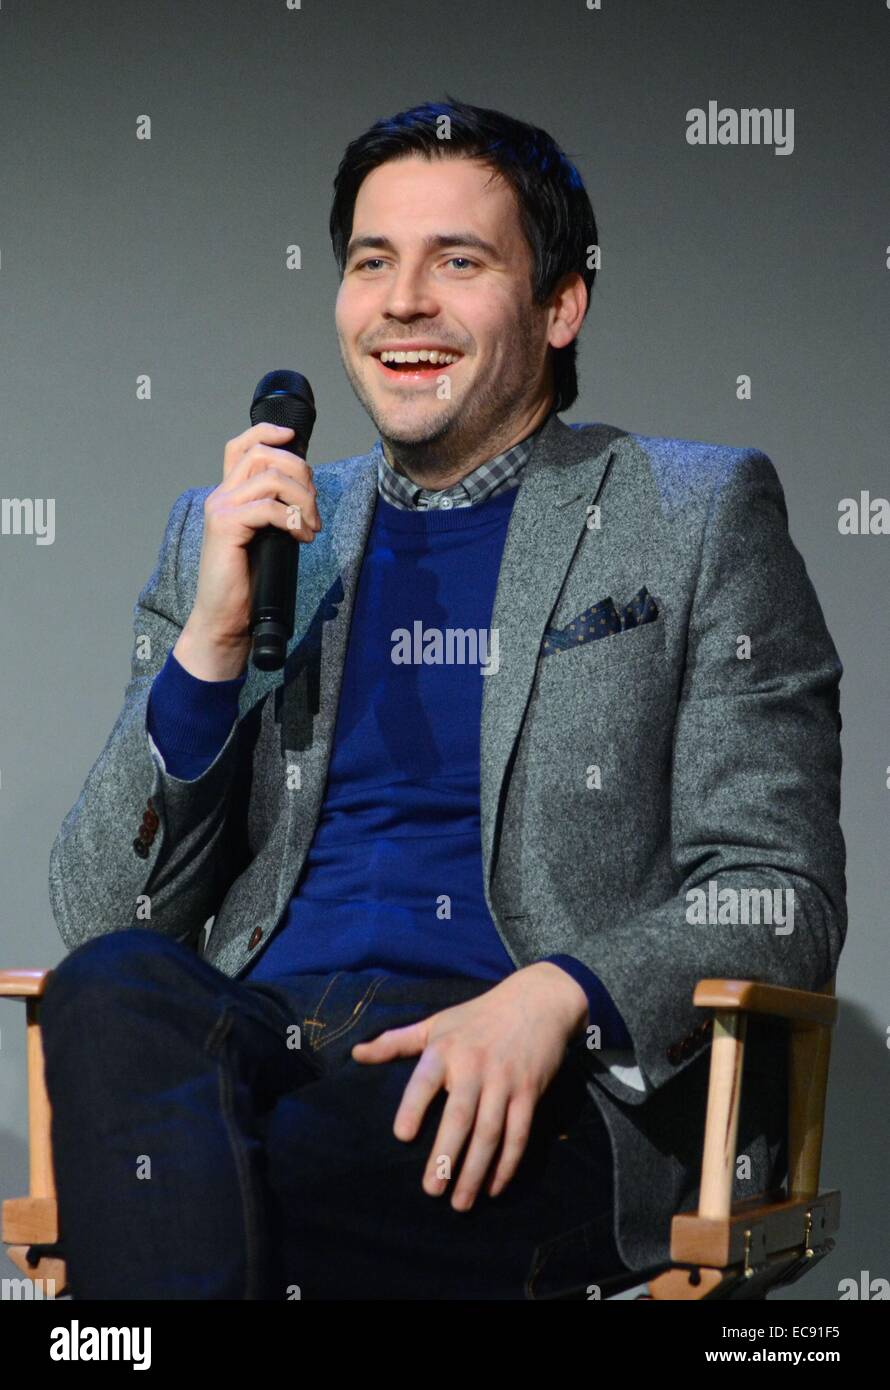 New York, NY, USA. 10th Dec, 2014. Rob James-Collier at in-store appearance  for Meet The Cast: DOWNTON ABBEY, The Apple Store Soho, New York, NY  December 10, 2014. Credit: Derek Storm/Everett Collection/Alamy